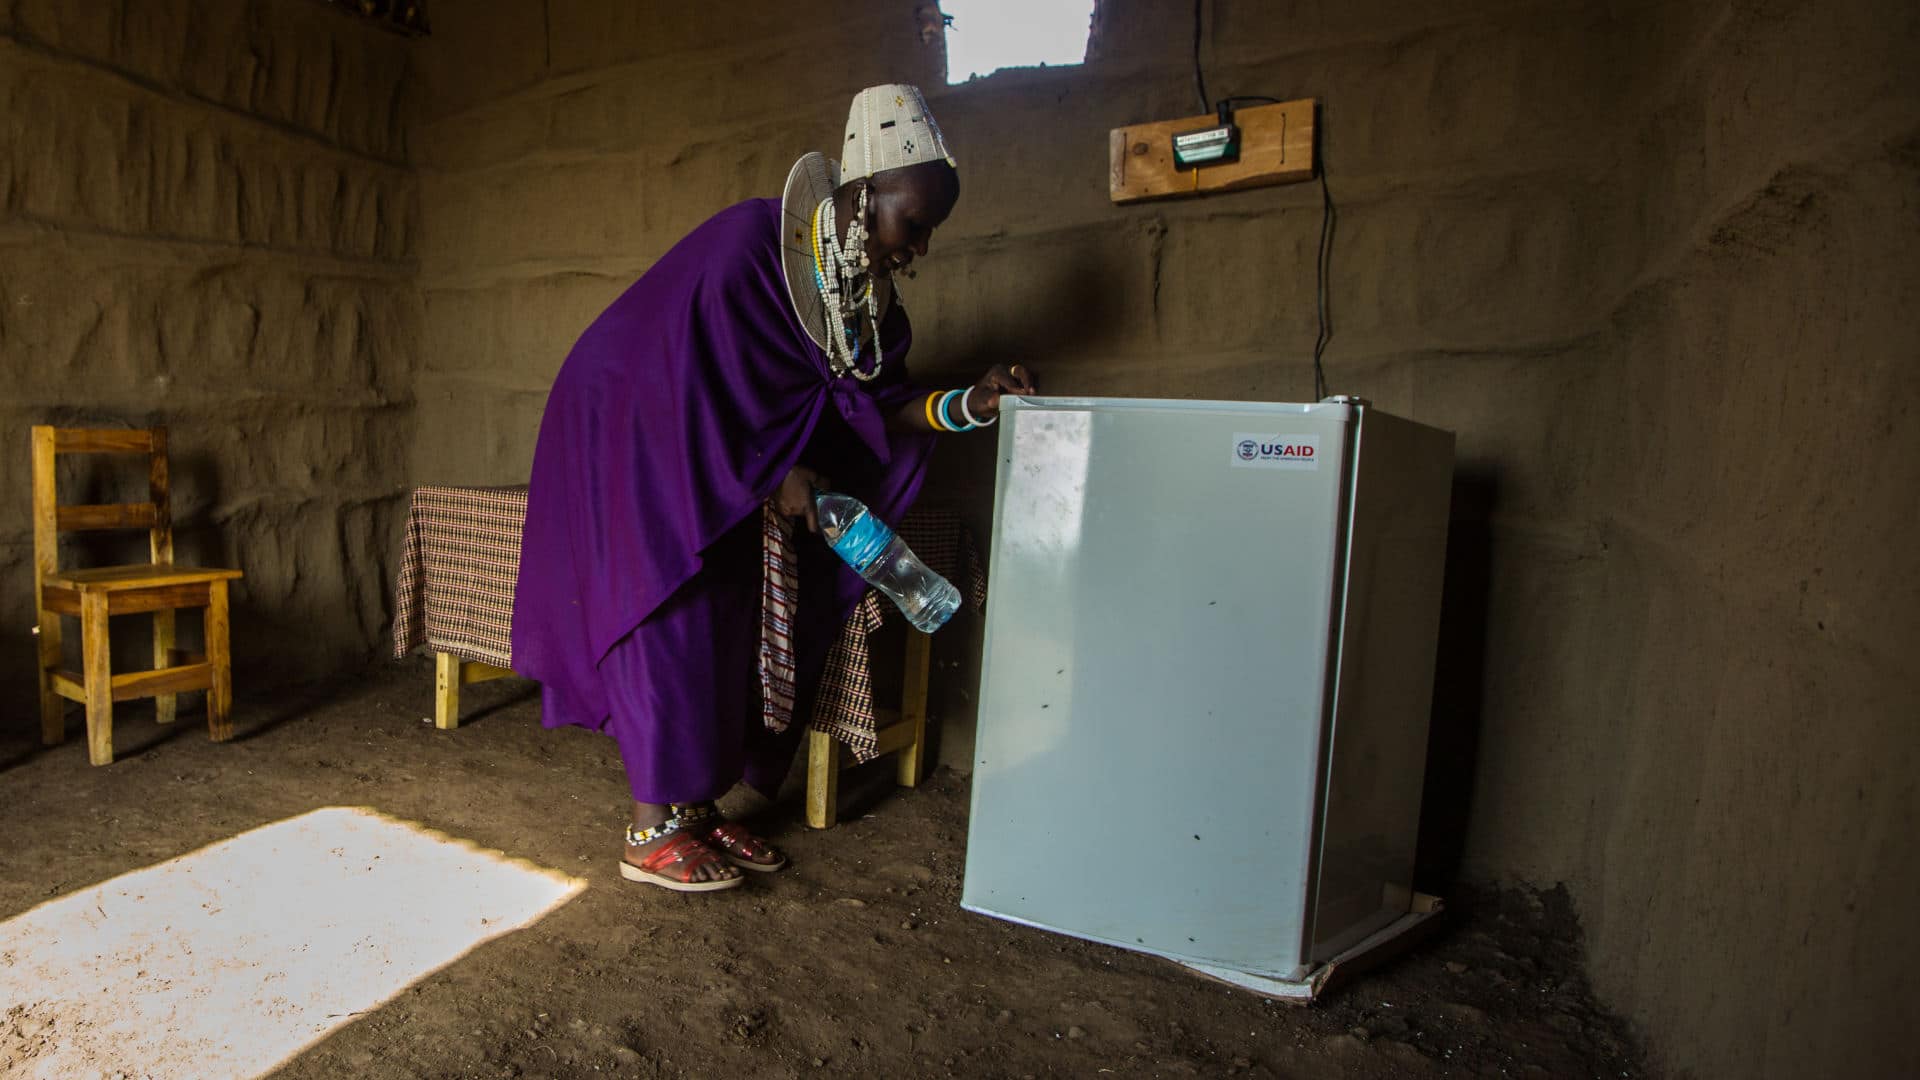 In rural Tanzania, some communities have access to shared electricity after the creation of solar powered micro-grids in 2014.